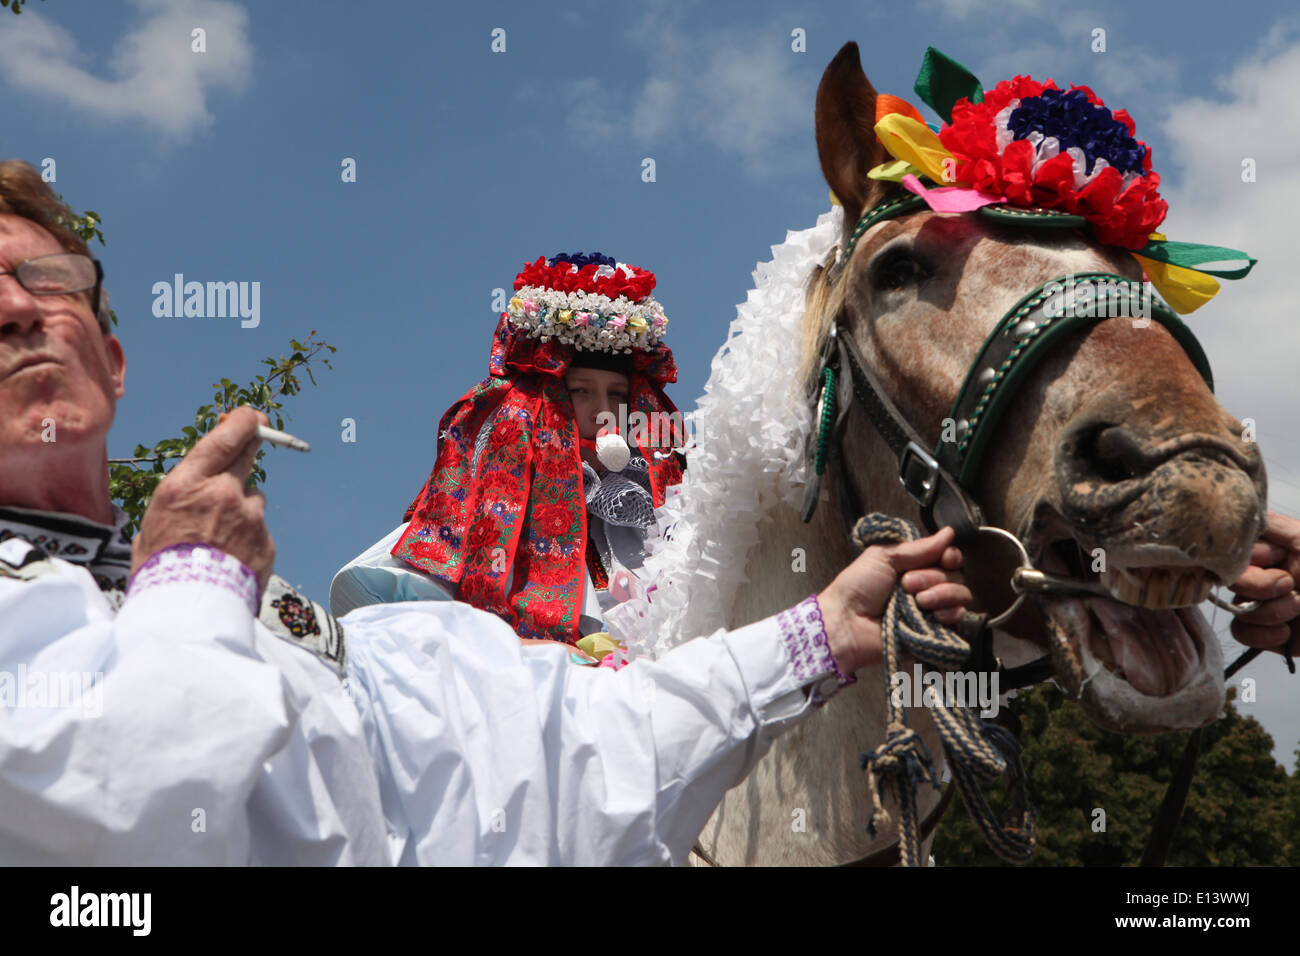 The Ride of the Kings. Traditional folklore festival in Vlcnov, Czech Republic. The boy king rides his horse. Stock Photo